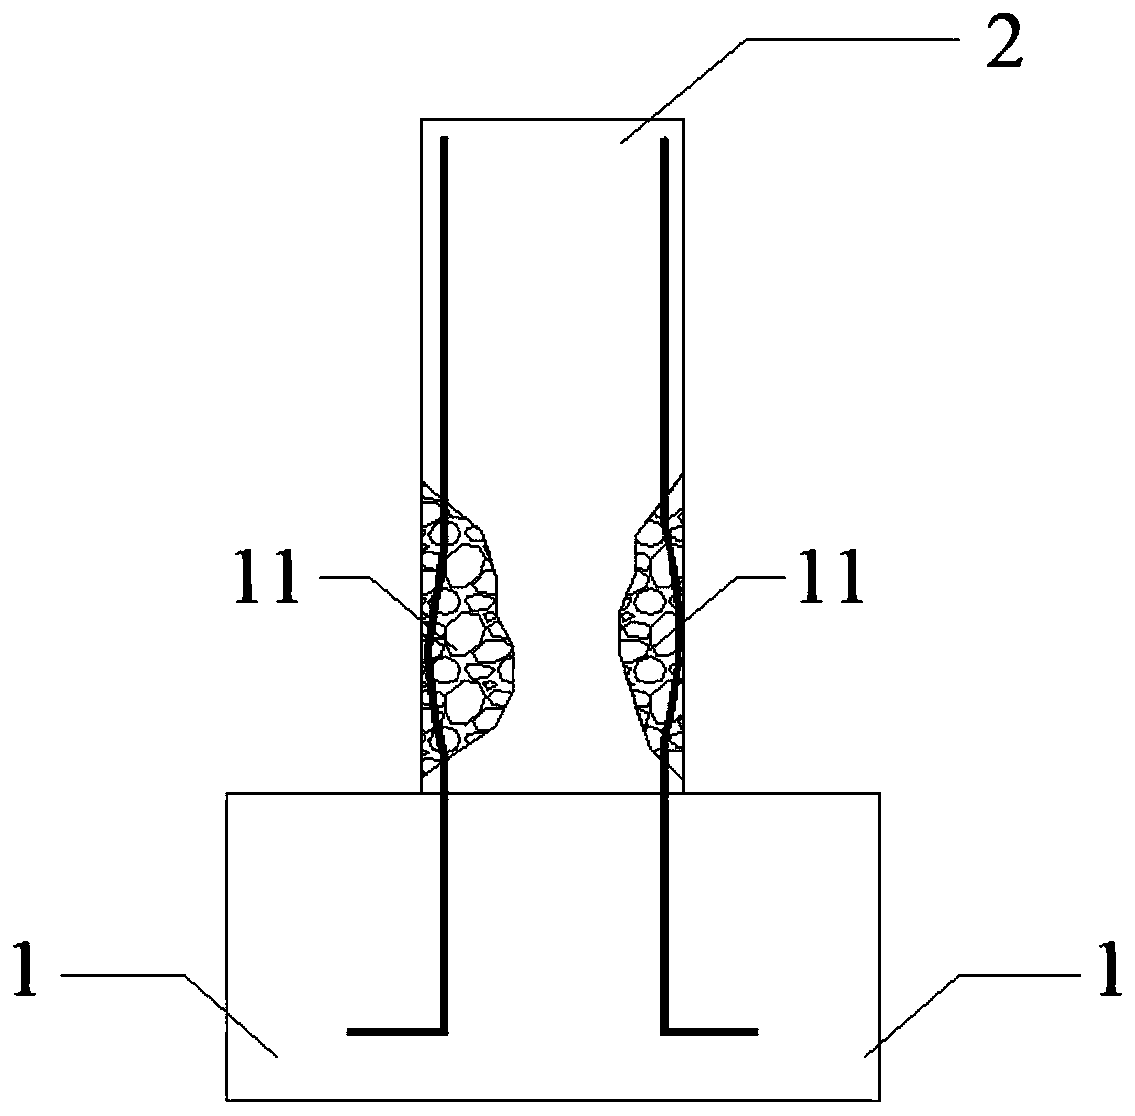 Method for quickly repairing reinforced concrete piers after earthquake